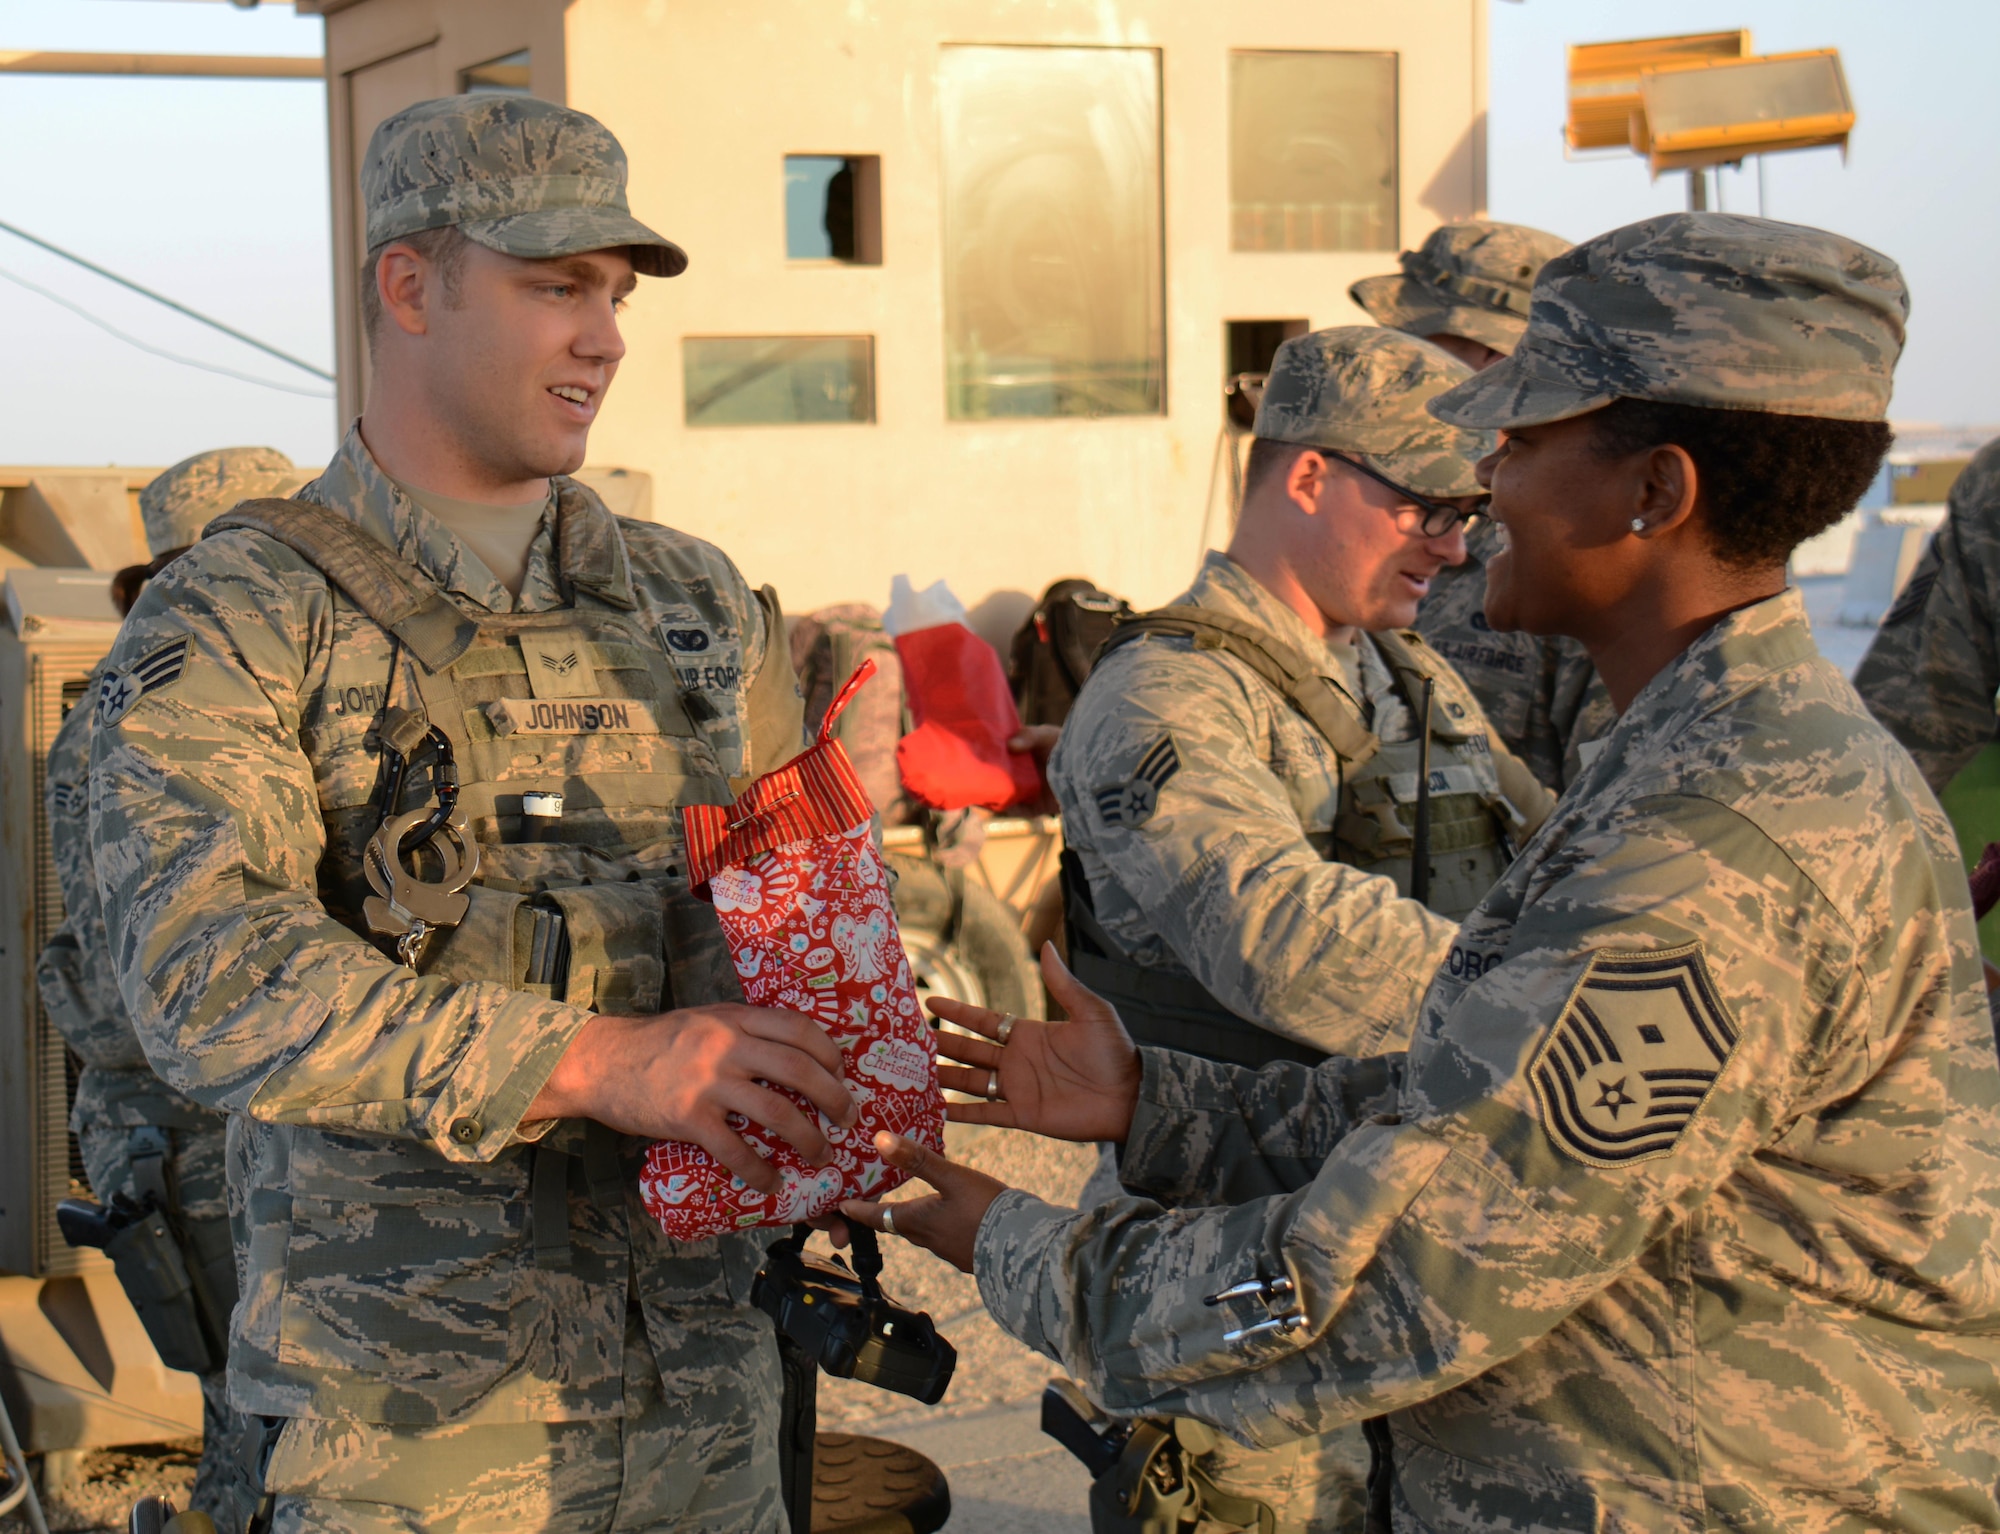 Senior Master Sgt. Temekia Clinkscales 379th Expeditionary Maintenance Squadron first sergeant, delivers a holiday stocking filled with candy, games and Christmas cards to a security forces airman at Al Udeid Air Base, Qatar Dec. 23. Clinkscales said the first sergeants decided to deliver the stockings to security forces Airmen to thank them for all they do to keep people safe. (U.S. Air Force photo by Tech. Sgt. James Hodgman/Released) 